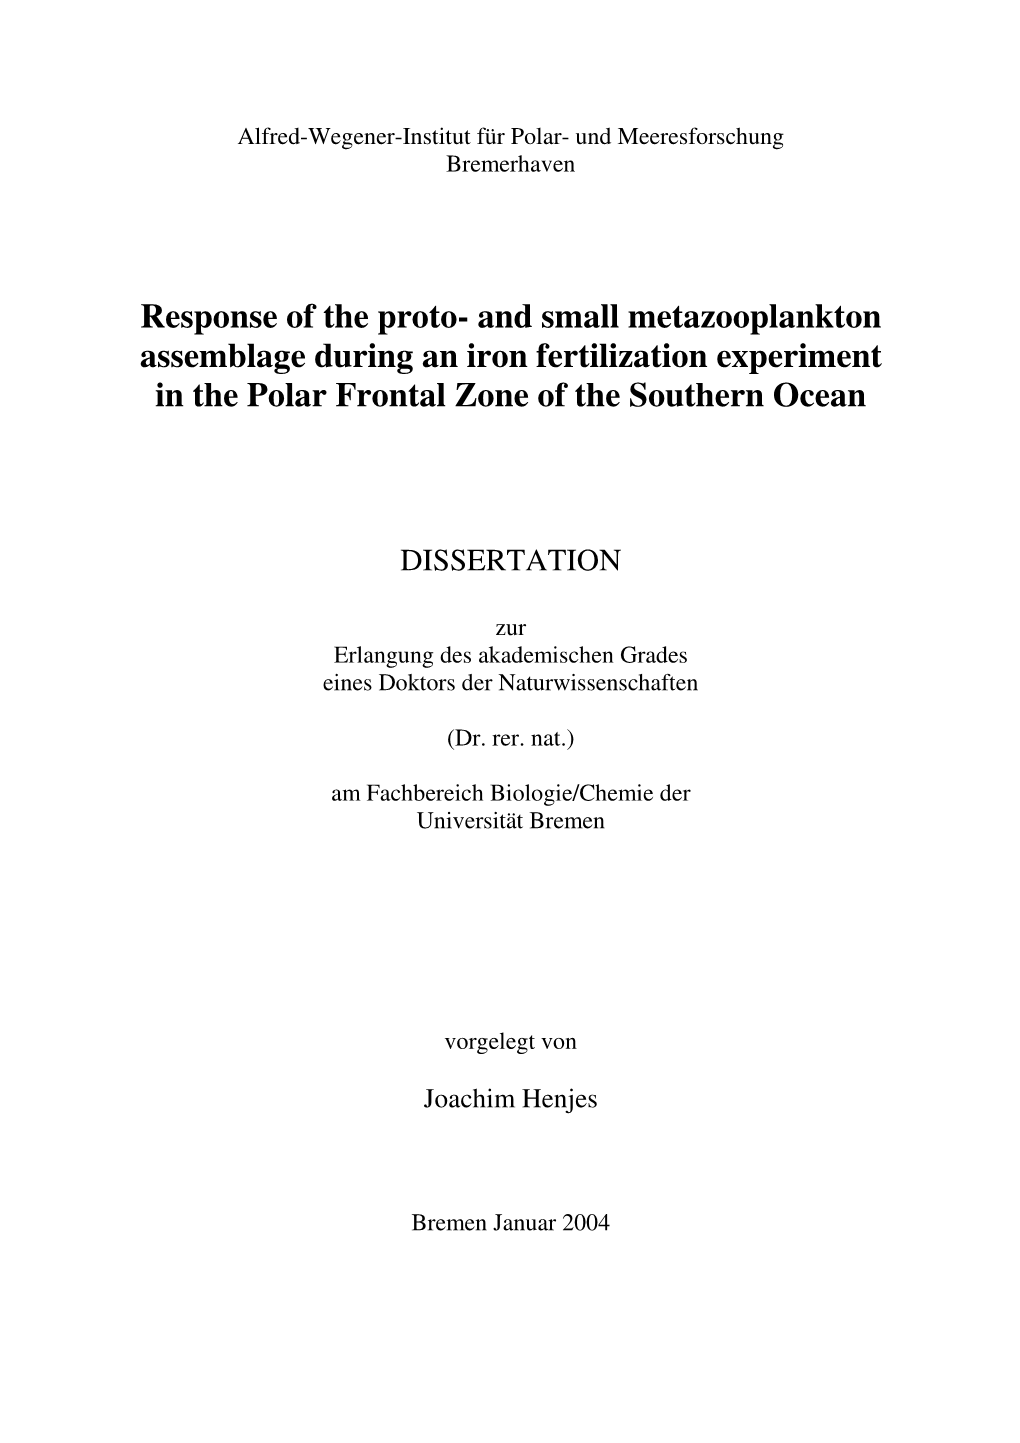 Response of the Proto- and Small Metazooplankton Assemblage During an Iron Fertilization Experiment in the Polar Frontal Zone of the Southern Ocean